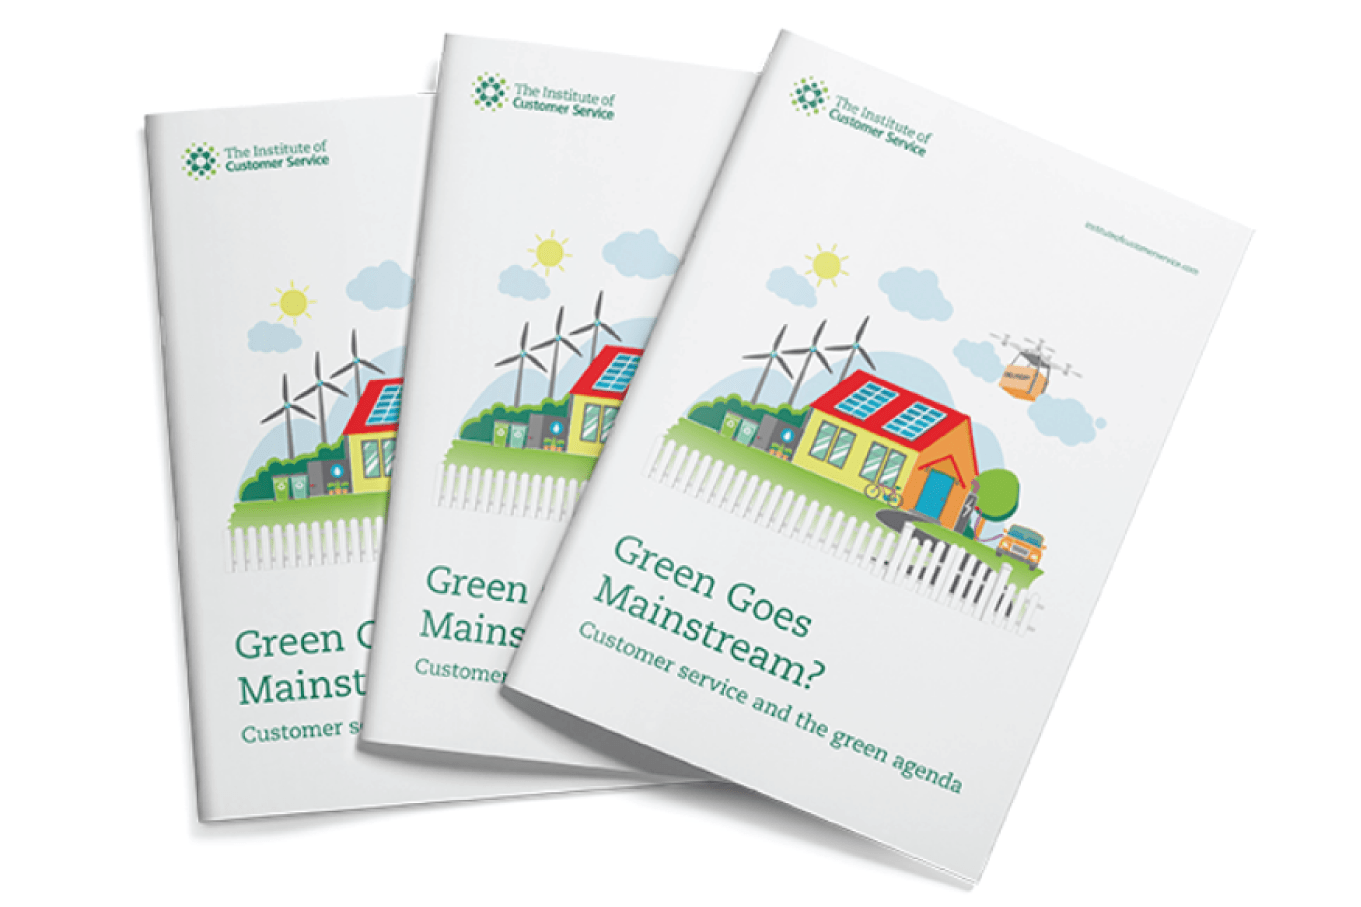  Green Goes Mainstream? Customer service and the green agenda – Research Launch